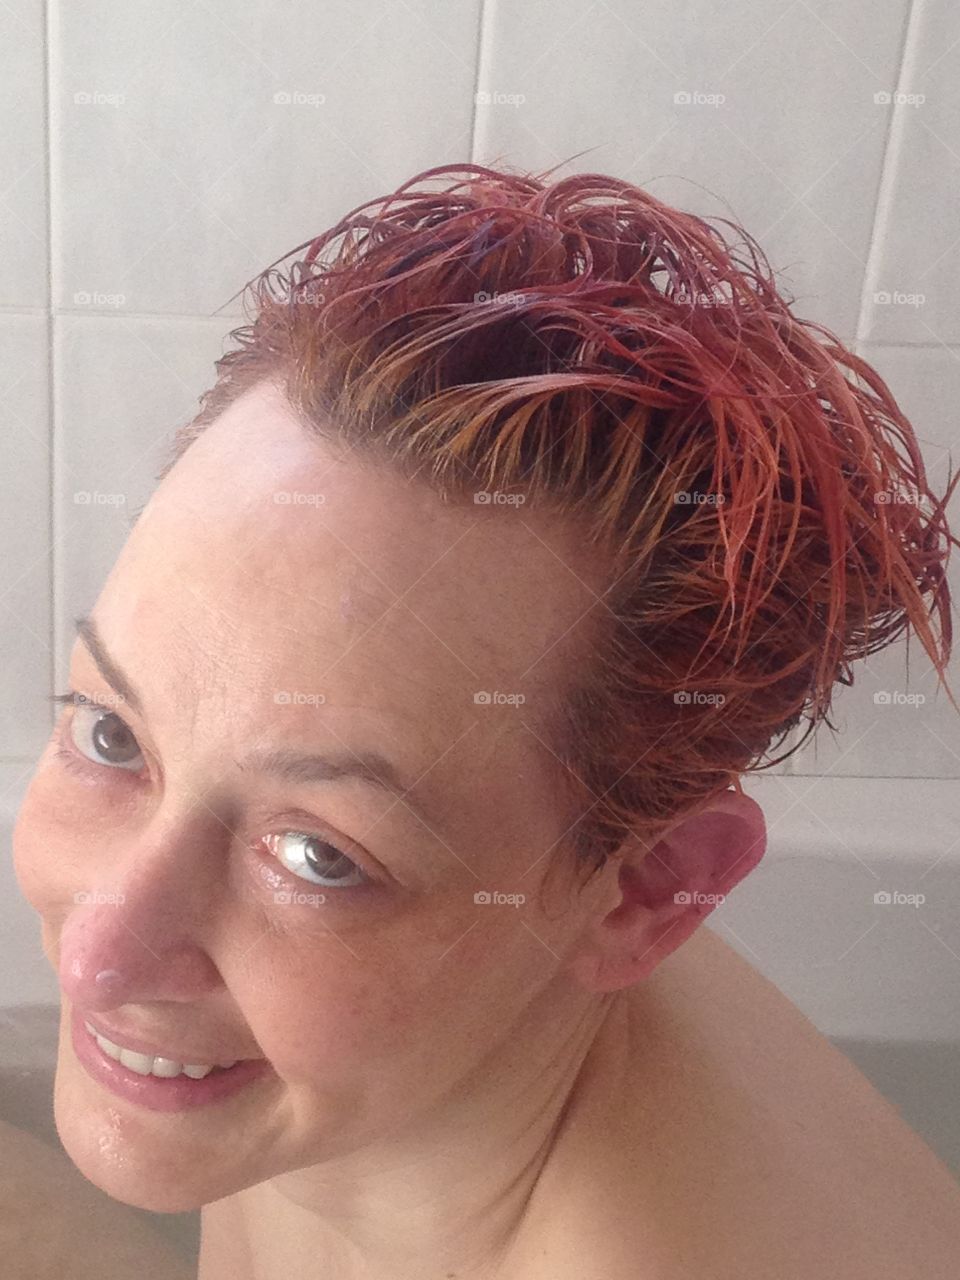 Me in bath because my husband thought my hair looked cool 